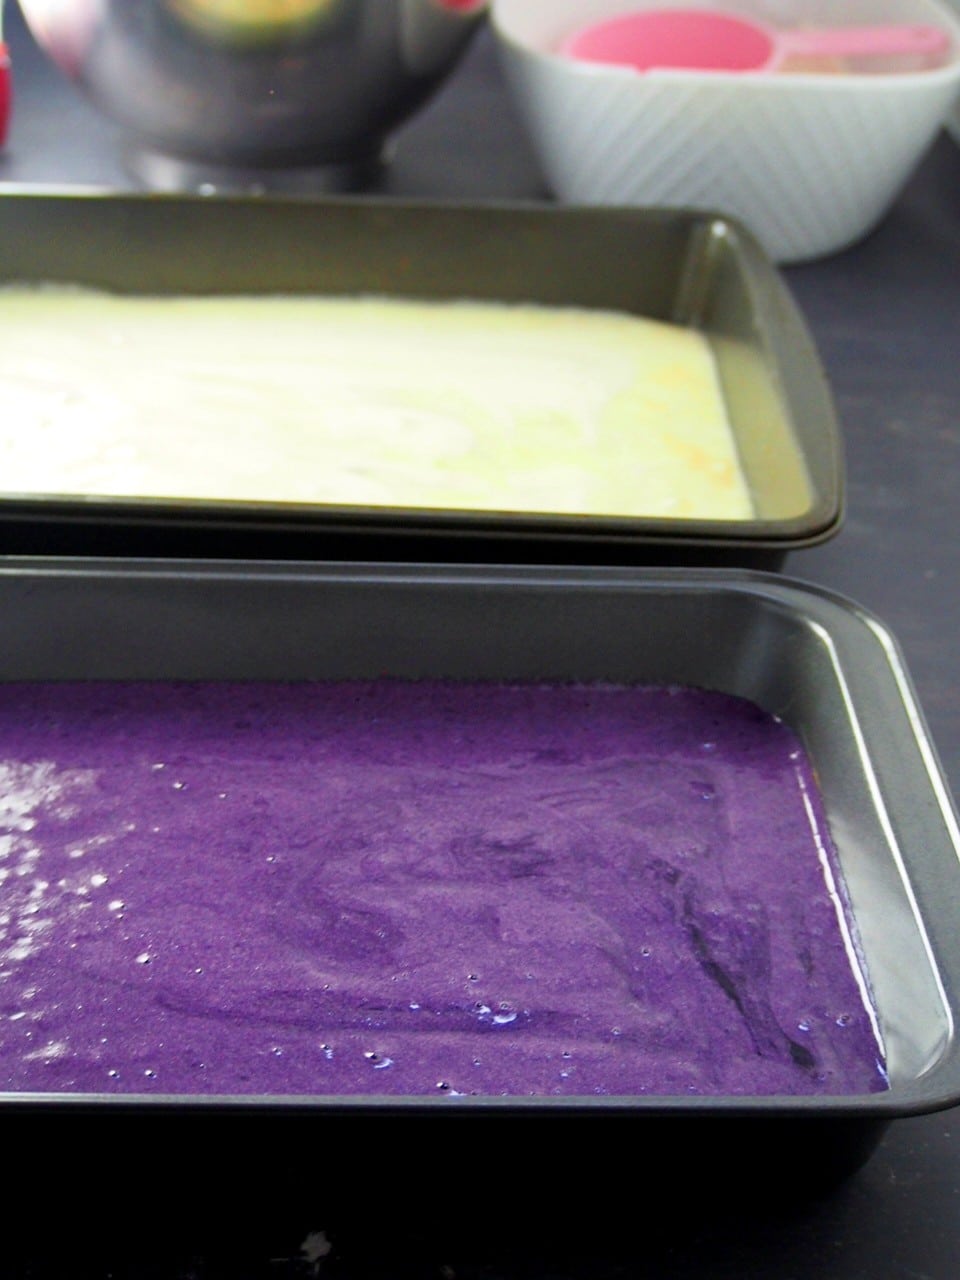 The ube and vanilla cake batters on baking pans ready for baking.